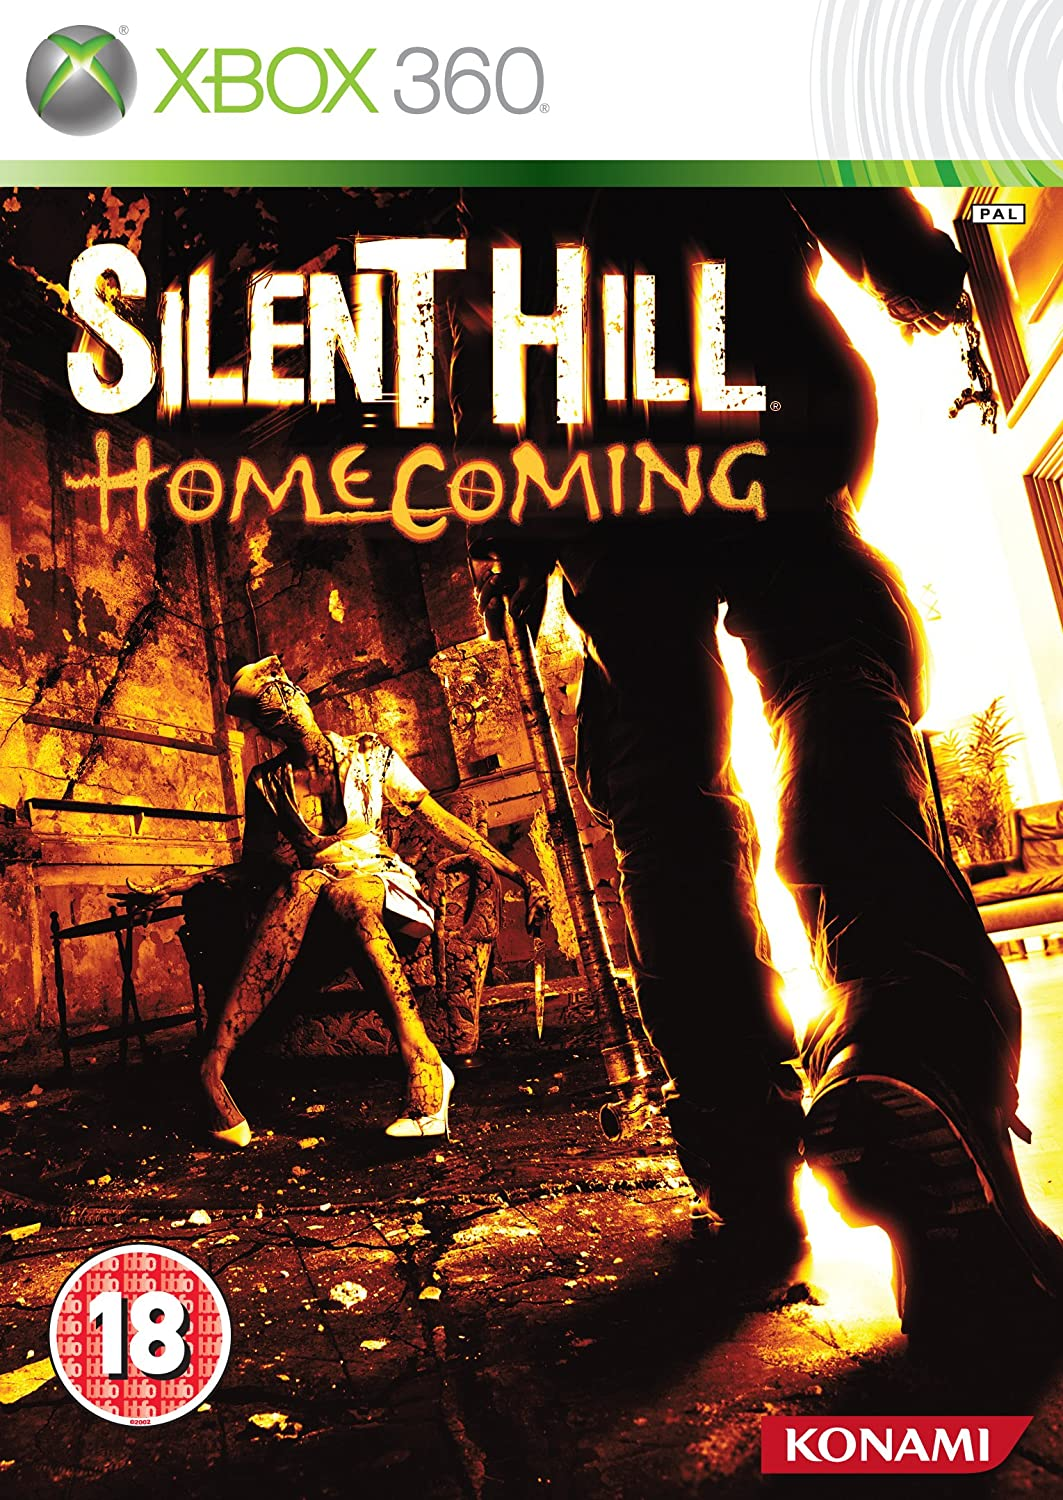 image 22 - Xbox 360 Games Download - SILENT HILL